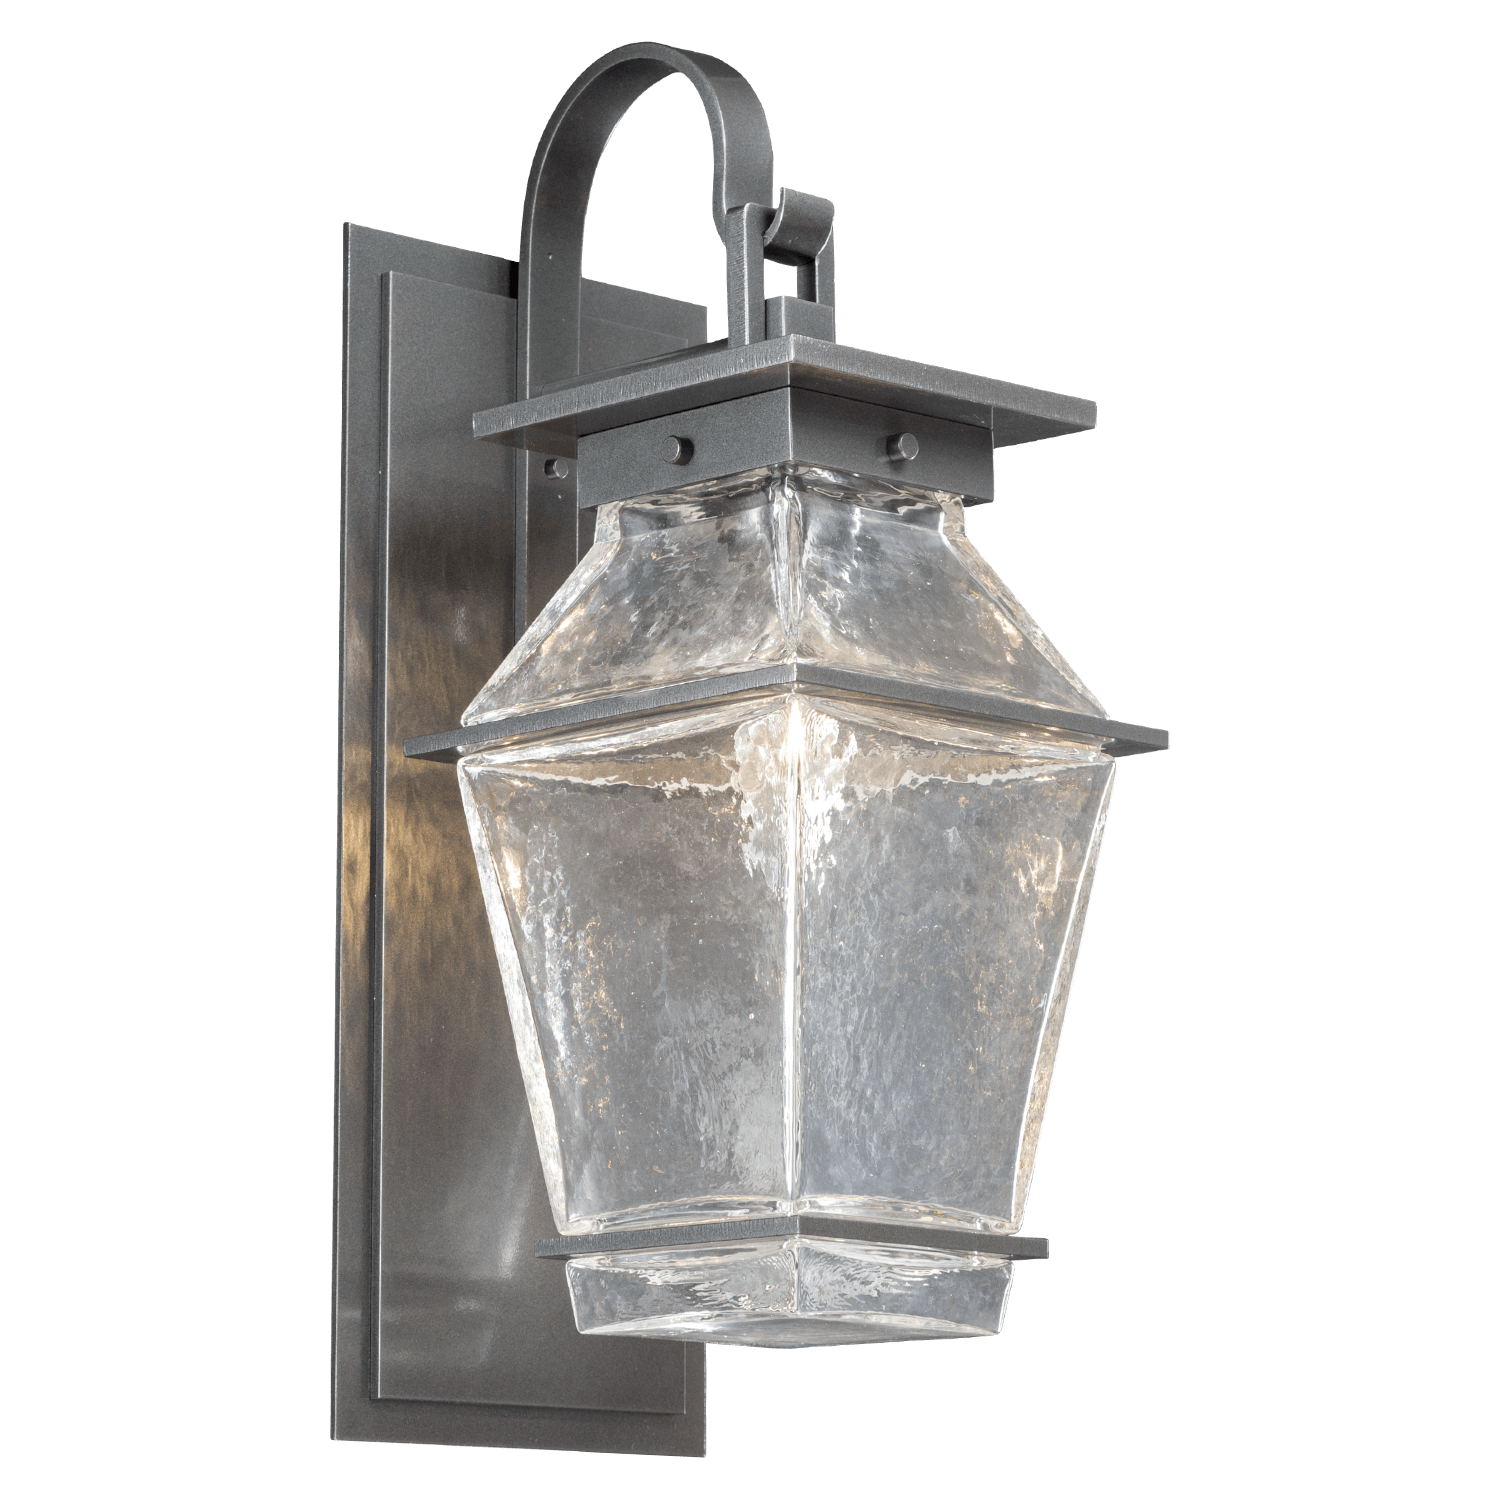 Lantern style outdoor sconce